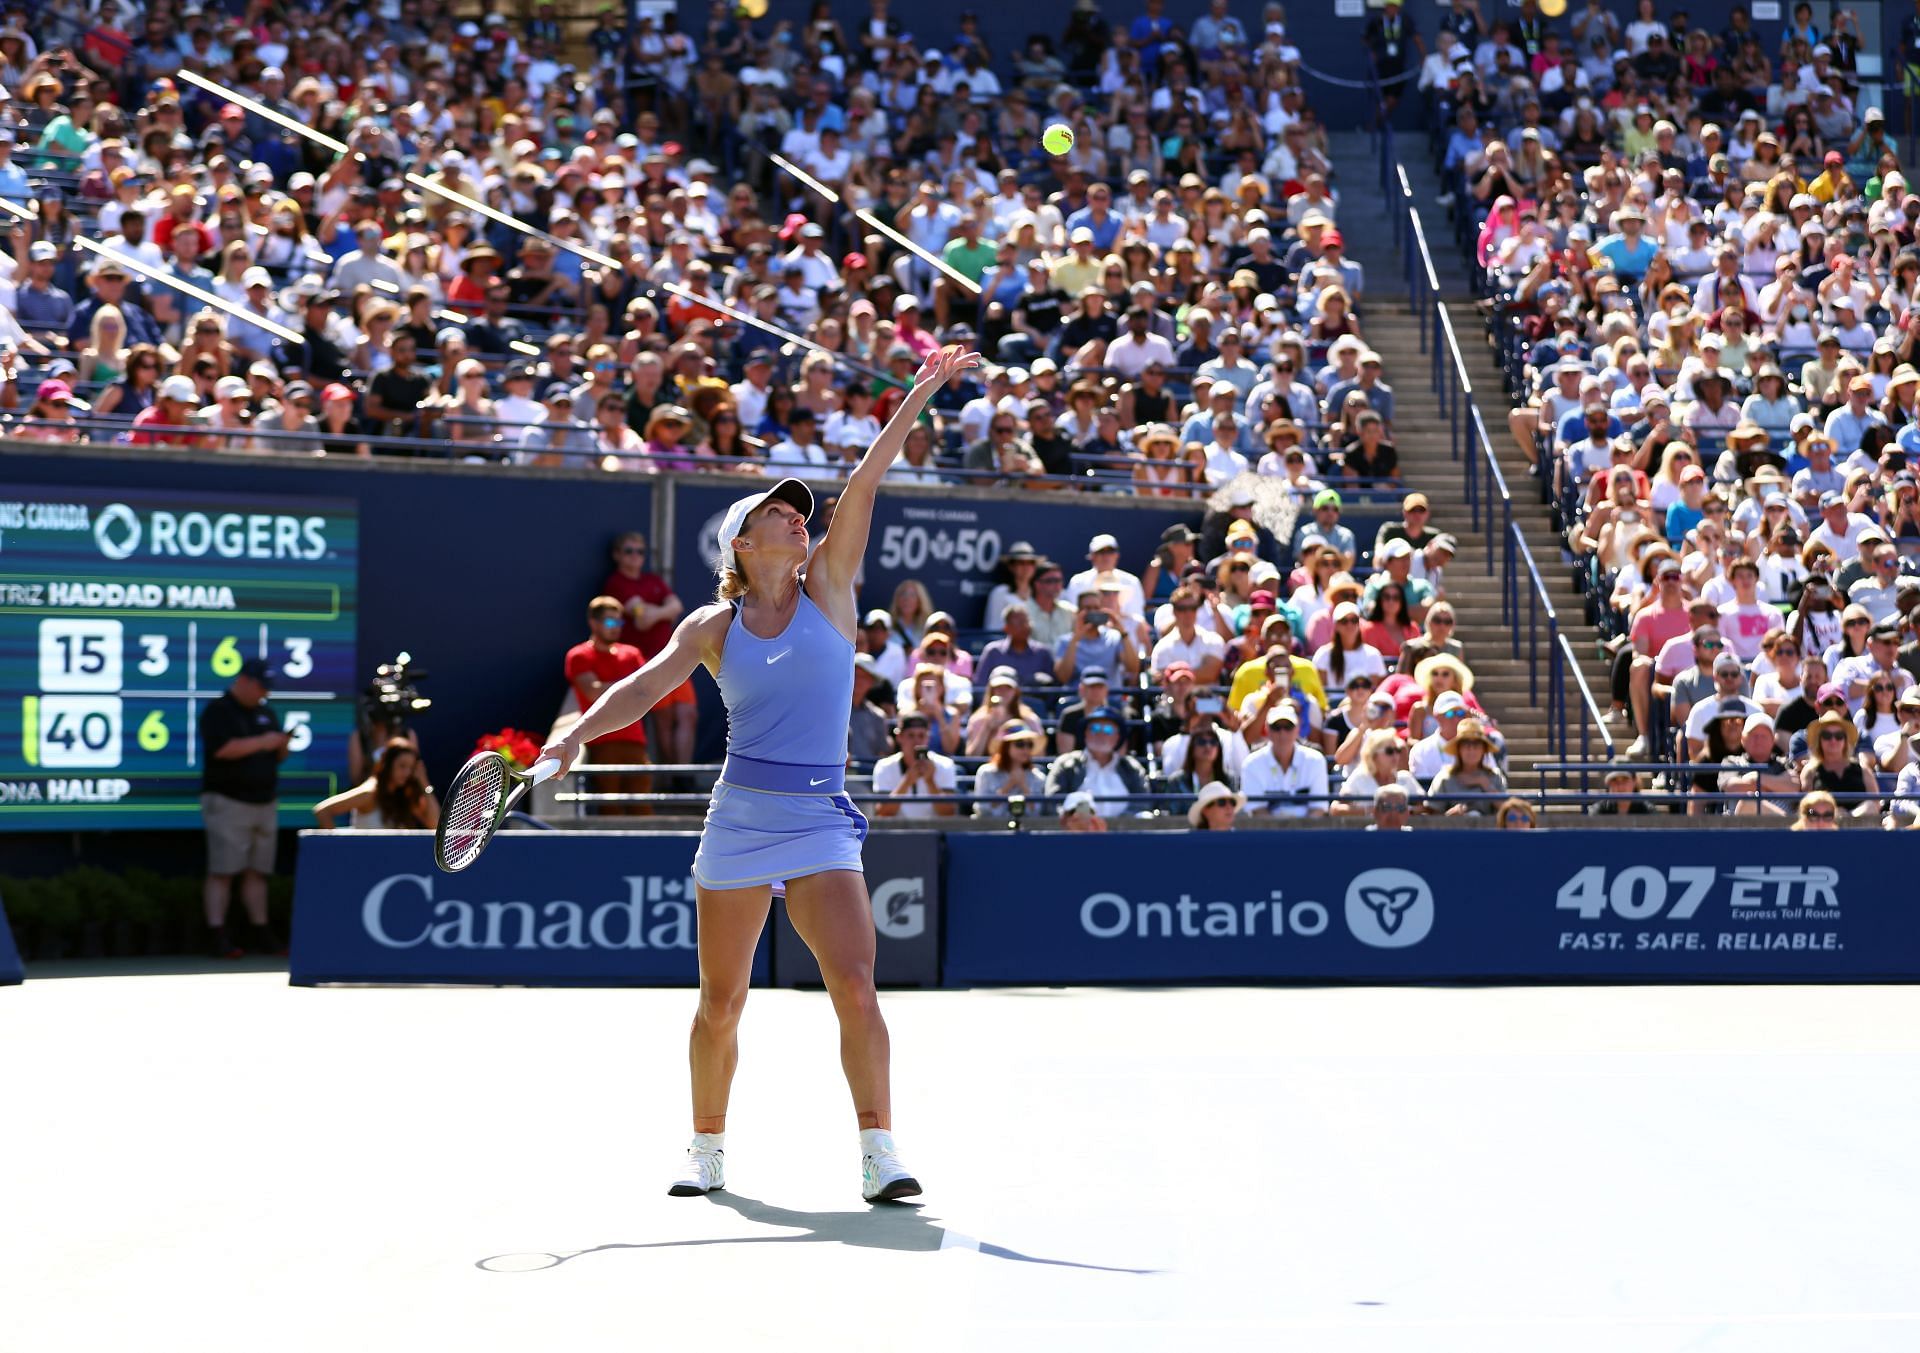 Halep in action at the National Bank Open in Toronto